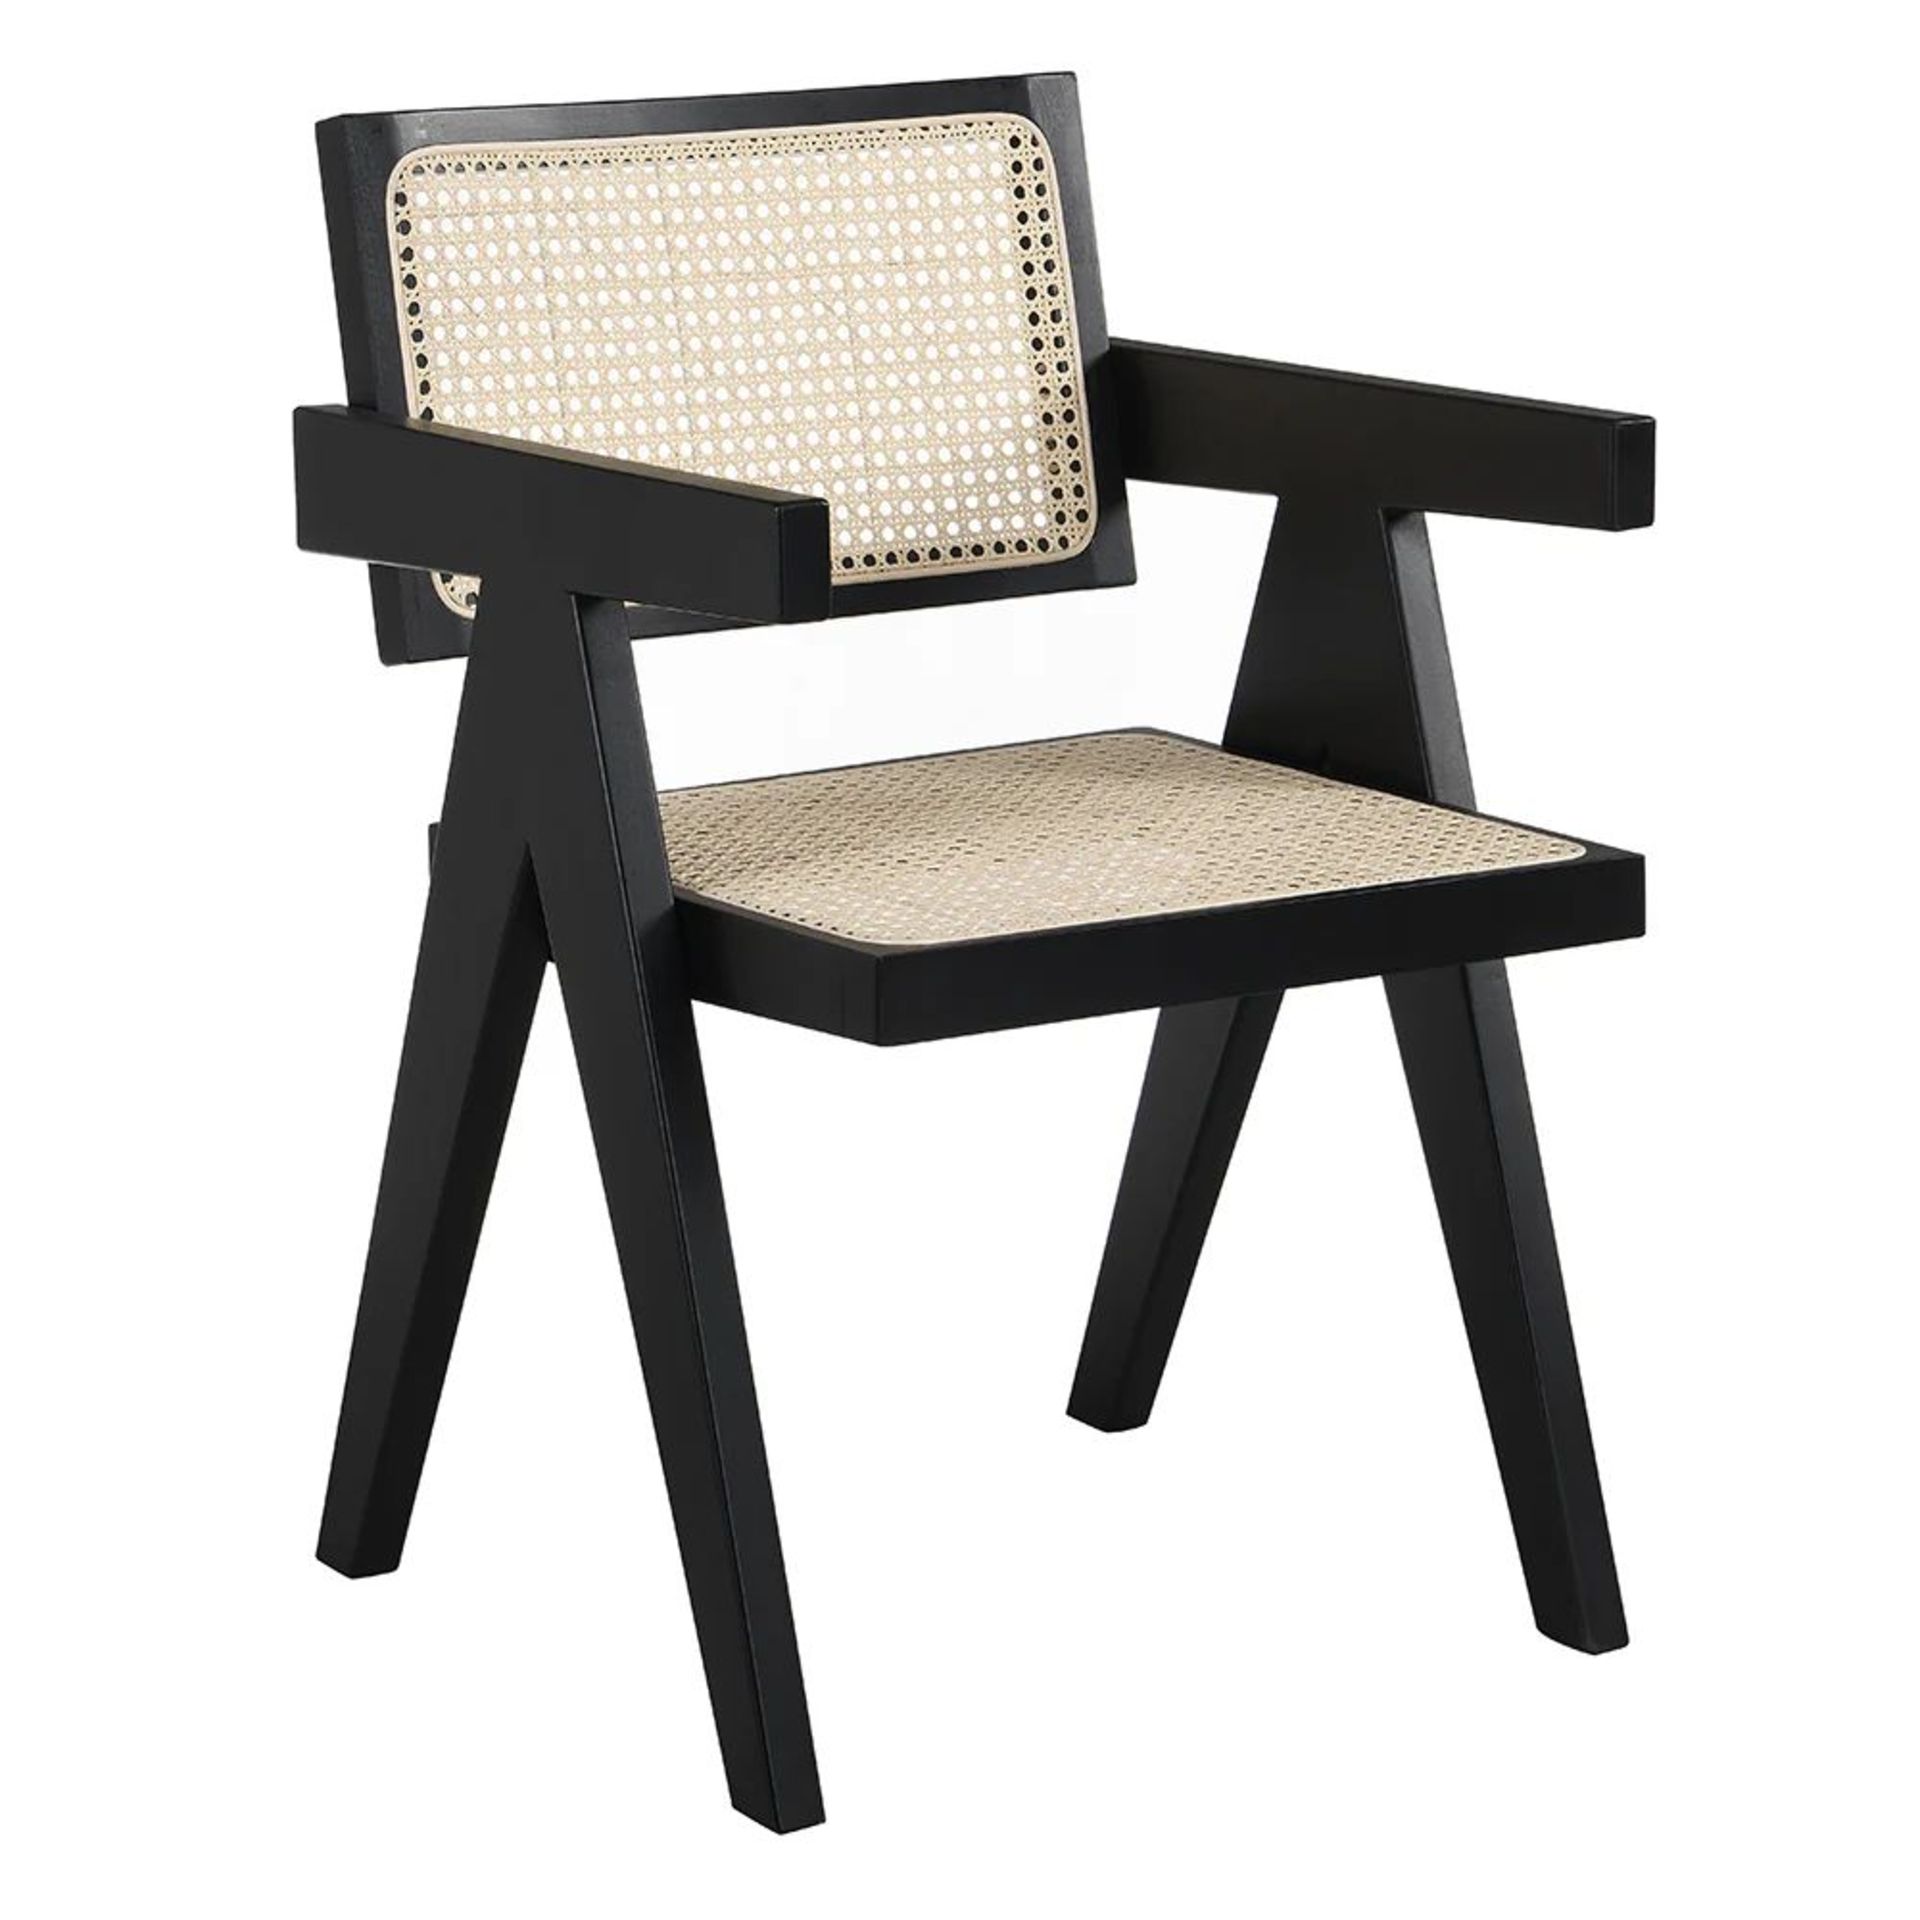 Jeanne Black Colour Cane Rattan Solid Beech Wood Dining Chair. - R19.2. RRP £219.99. The cane rattan - Image 2 of 4